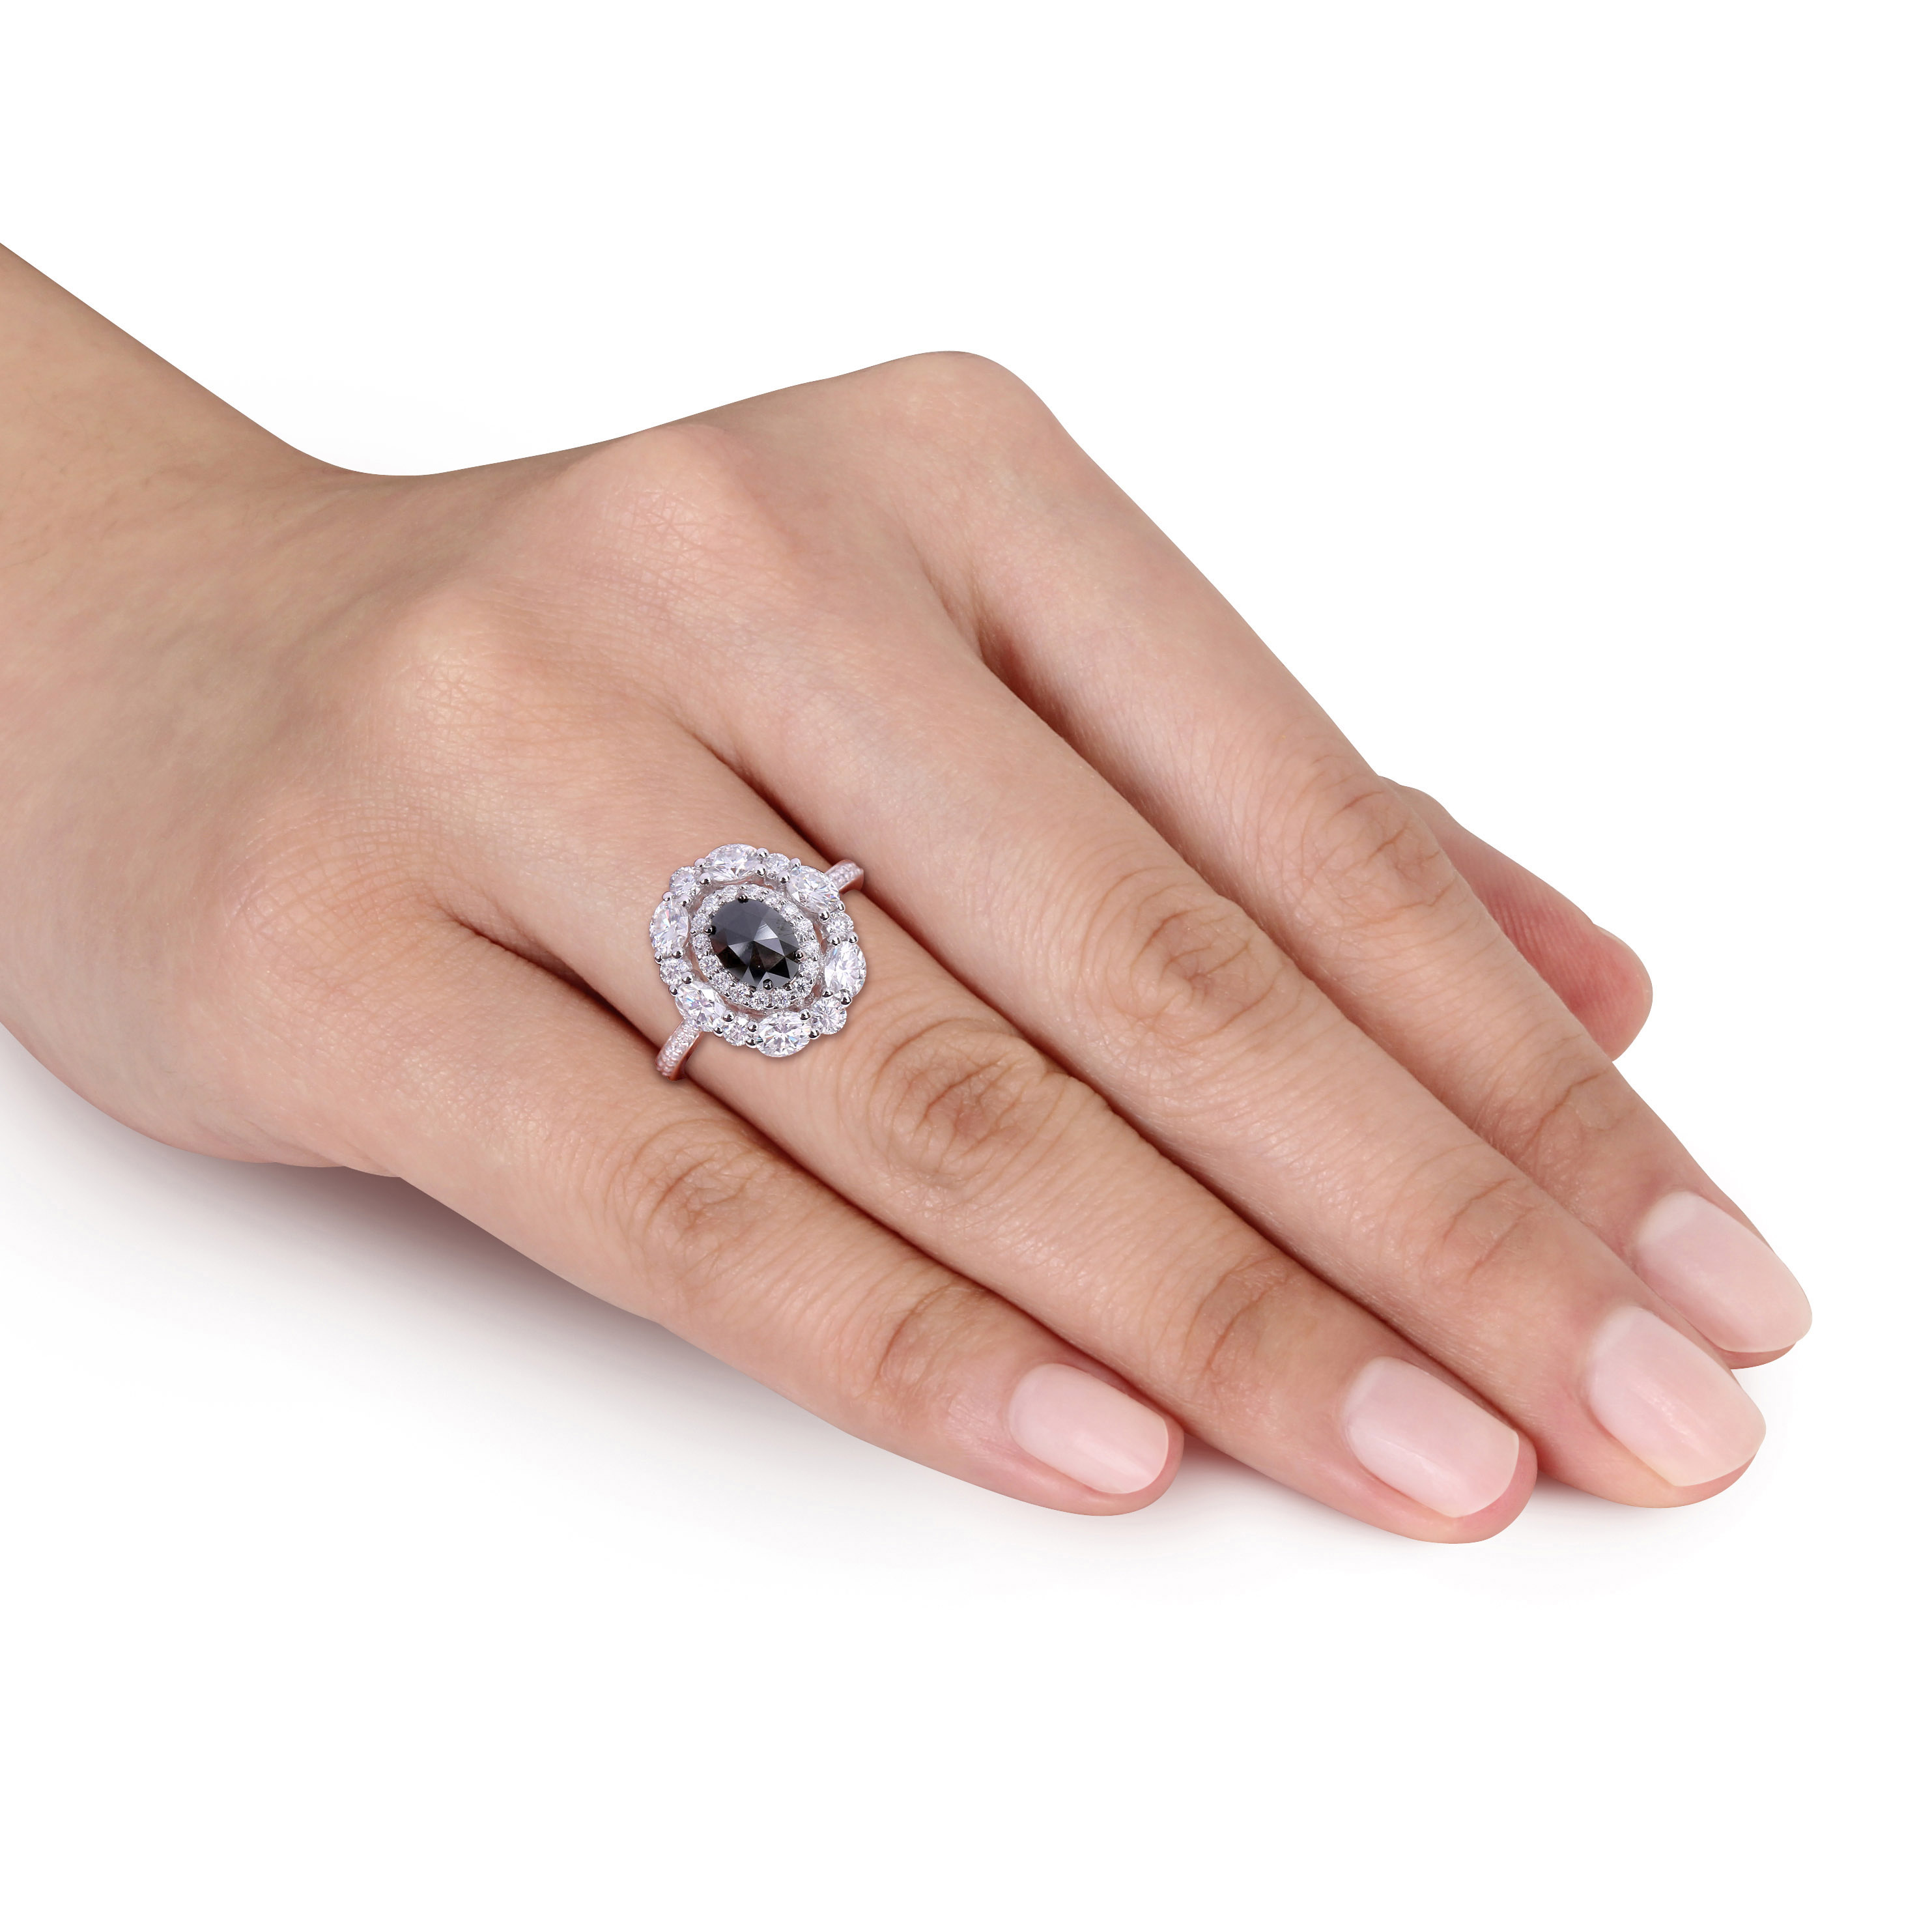 2 CT DEW Created Moissanite and 3/4 CT TW Black Oval Diamond Engagement Ring in 10k White Gold